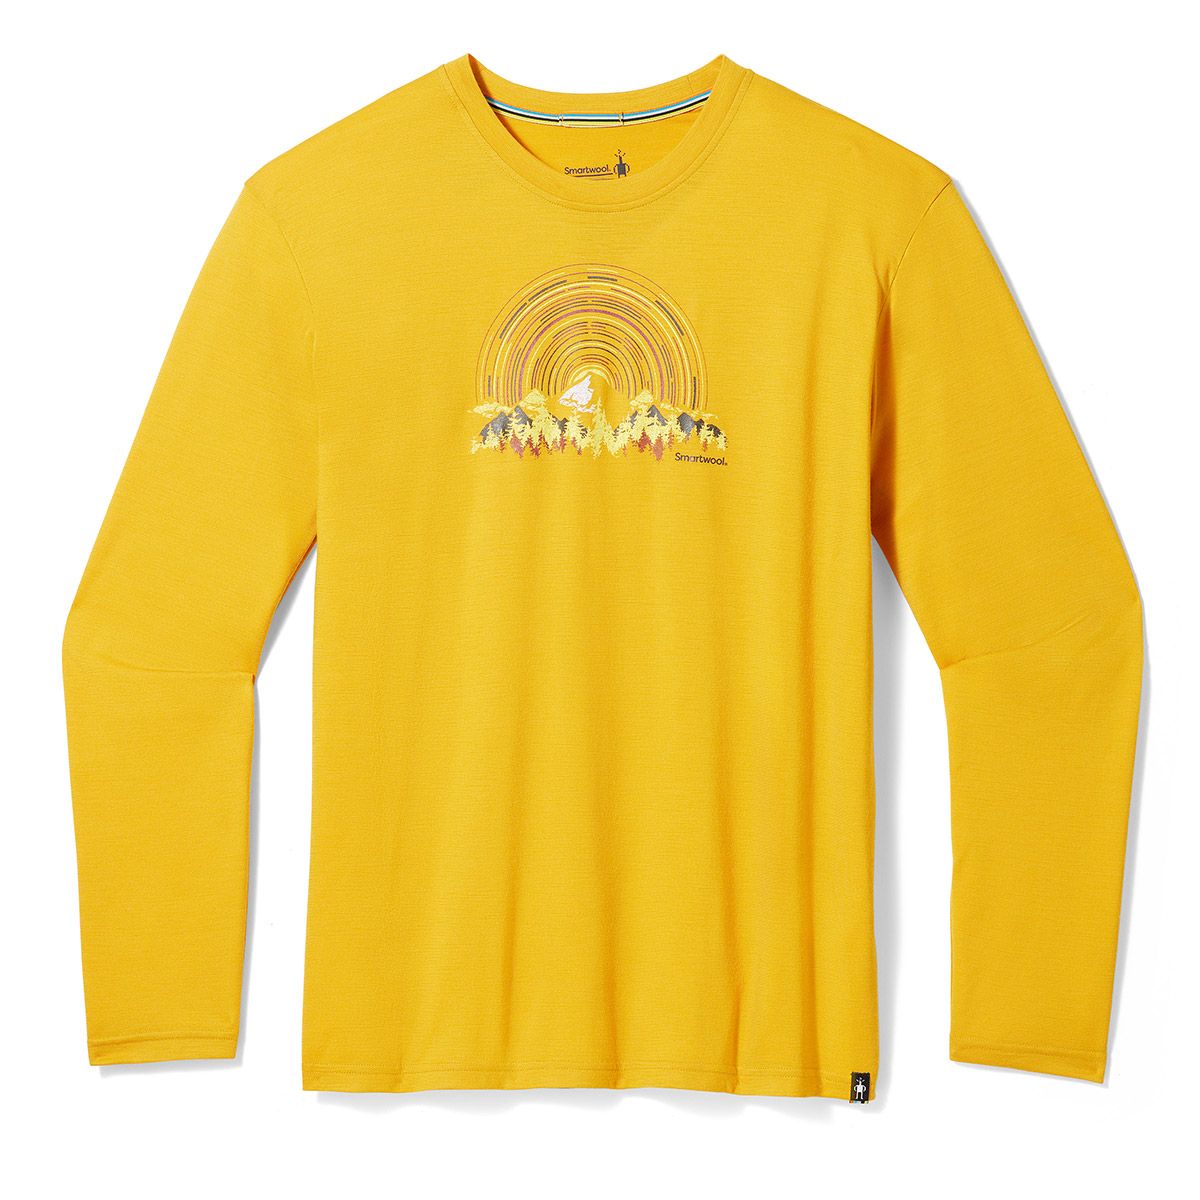 Never Summer Mountains Graphic Long Sleeve Tee